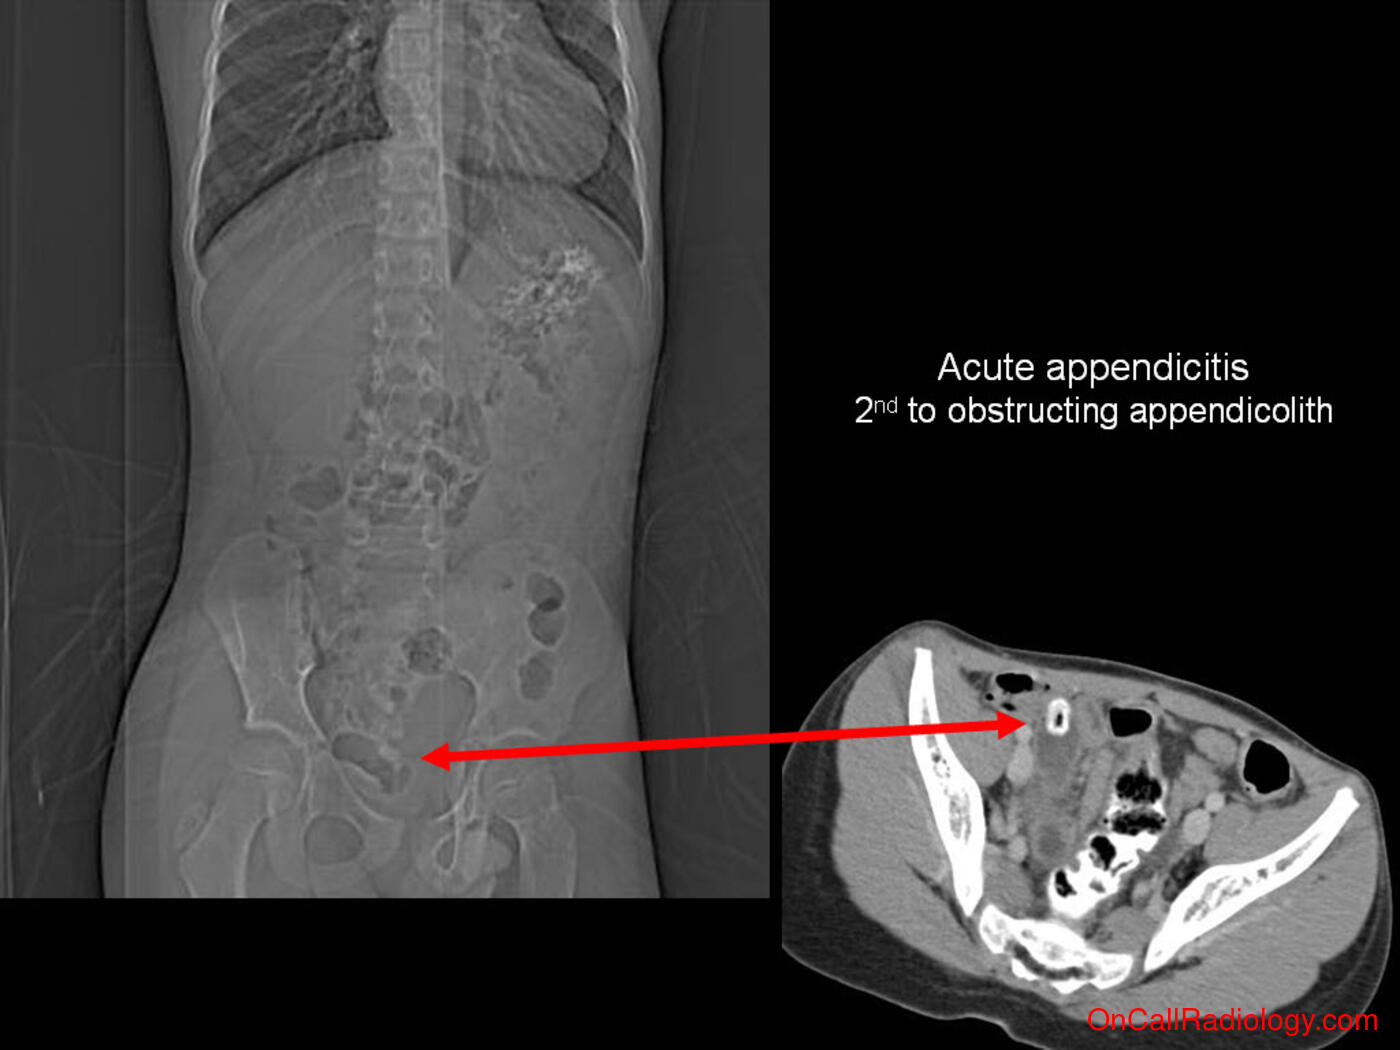 Calcifications (Appendicolith causing acute appendicitis - Plain film, Radiograph, CT, Computed tomography)